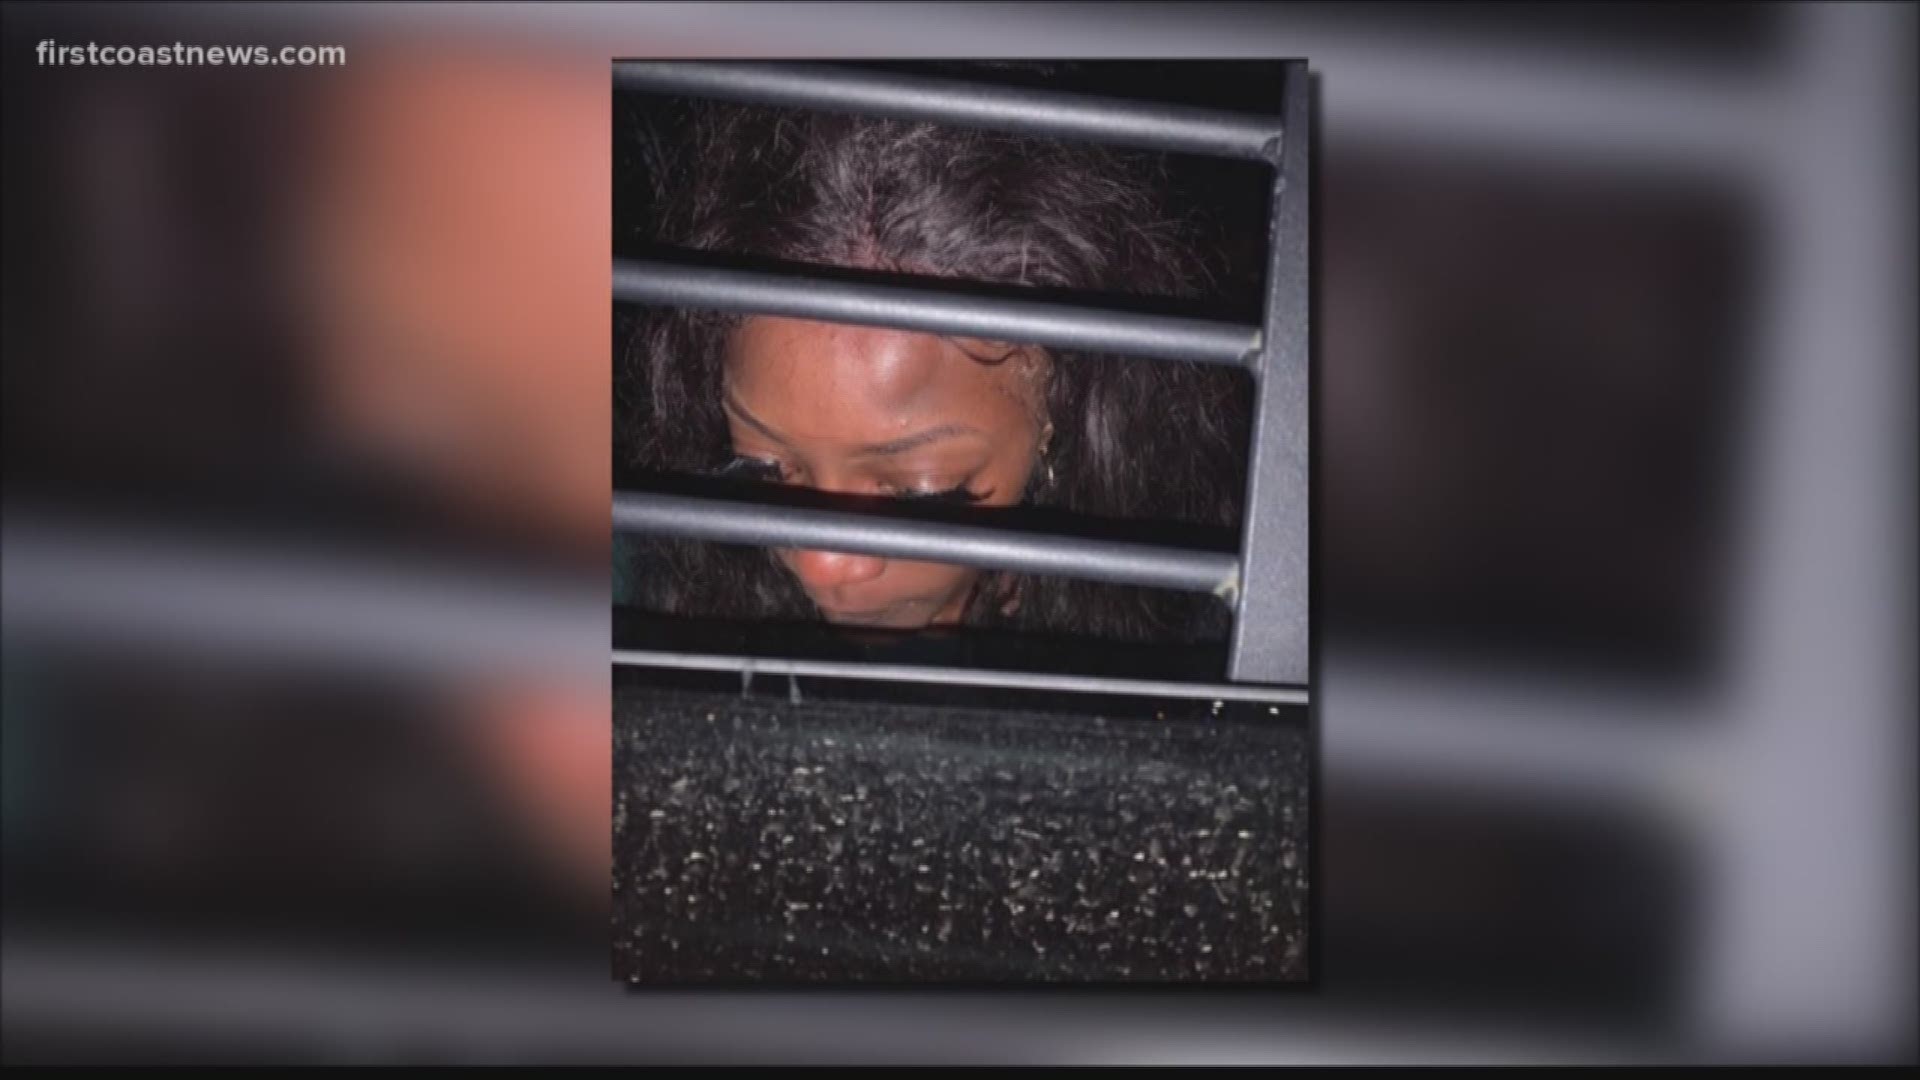 Jacksonville Sheriff’s Office records show that Deaira Alston, the woman in the video, was arrested and is facing charges.